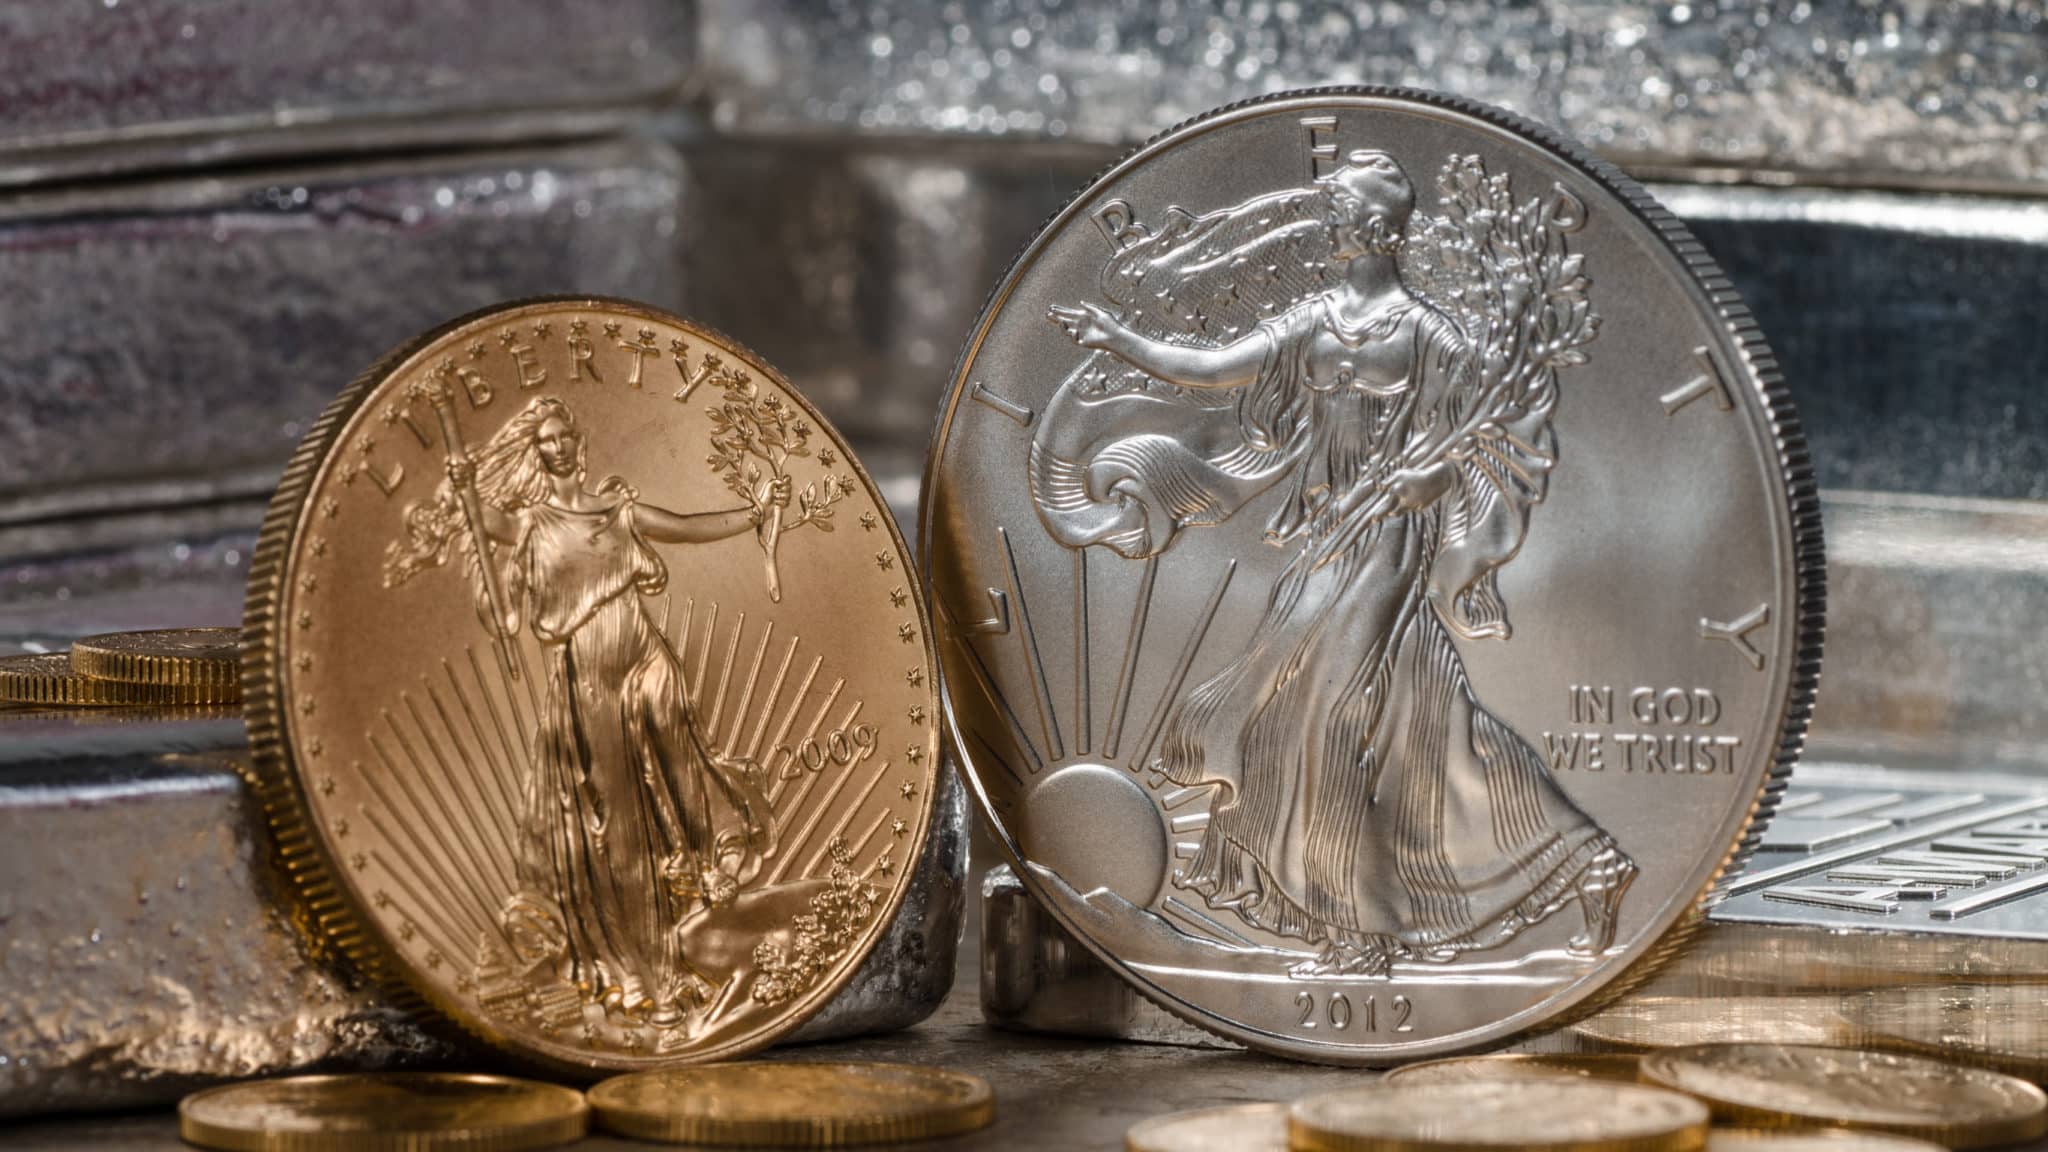 5. A Collector's Paradise: Tips and Tricks to Acquire and Safeguard These High-Value Numismatic Marvels